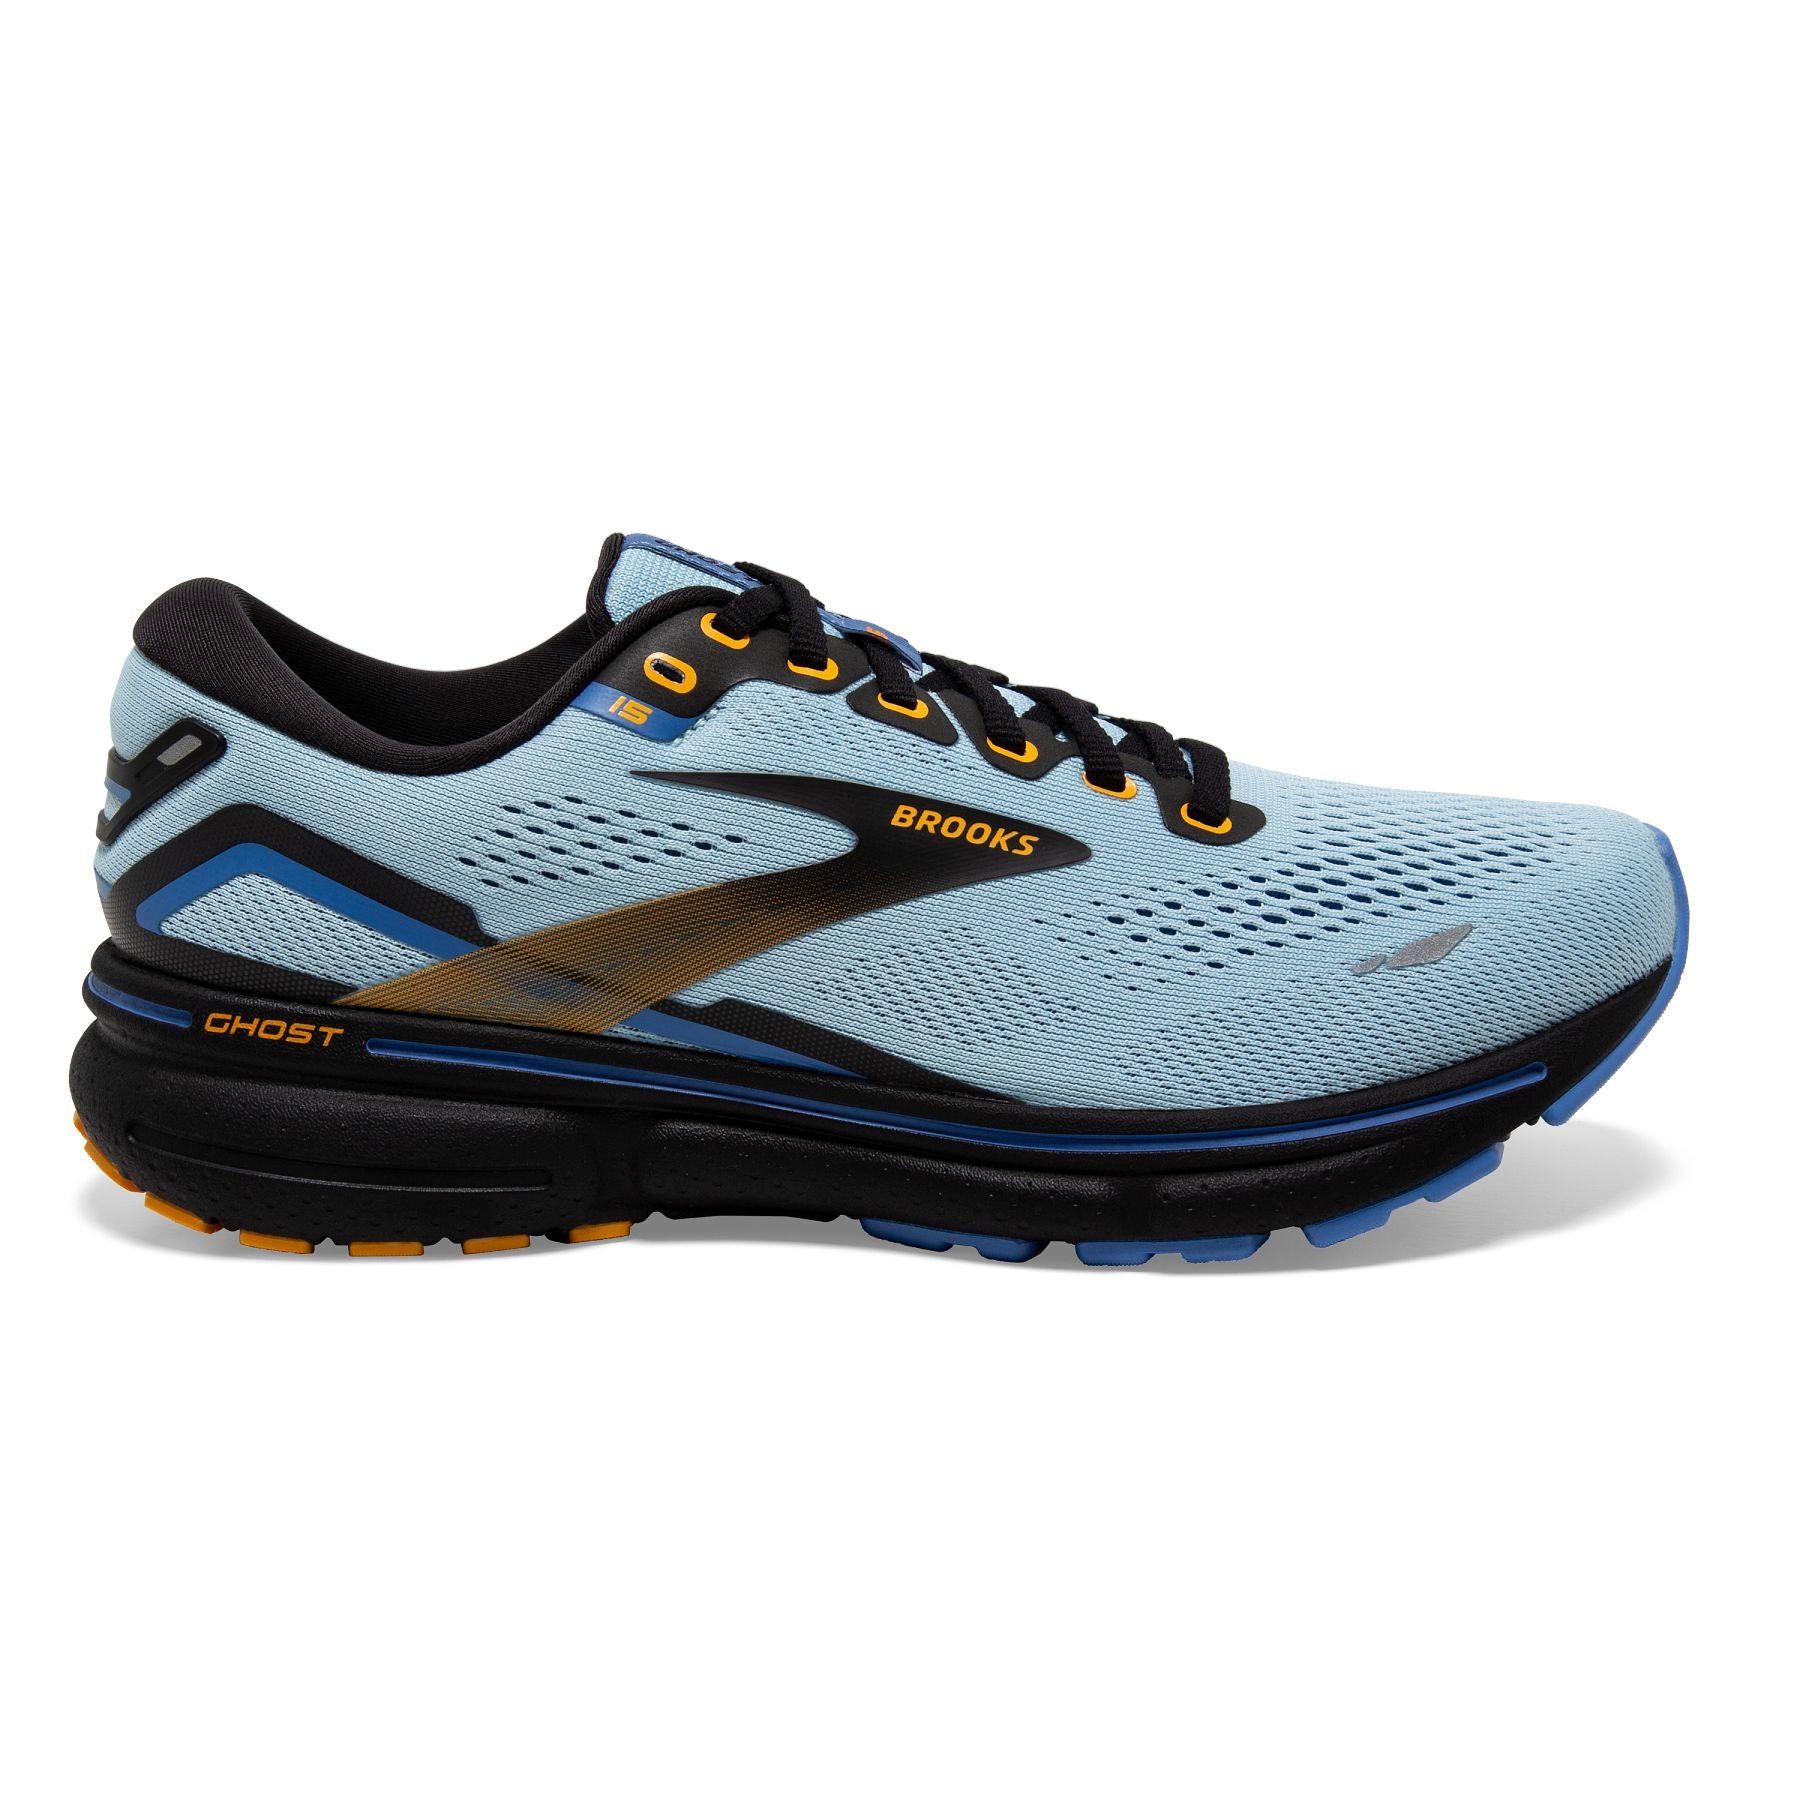 Lateral view of the Women's Ghost 15 in Light Blue/Black/Yellow